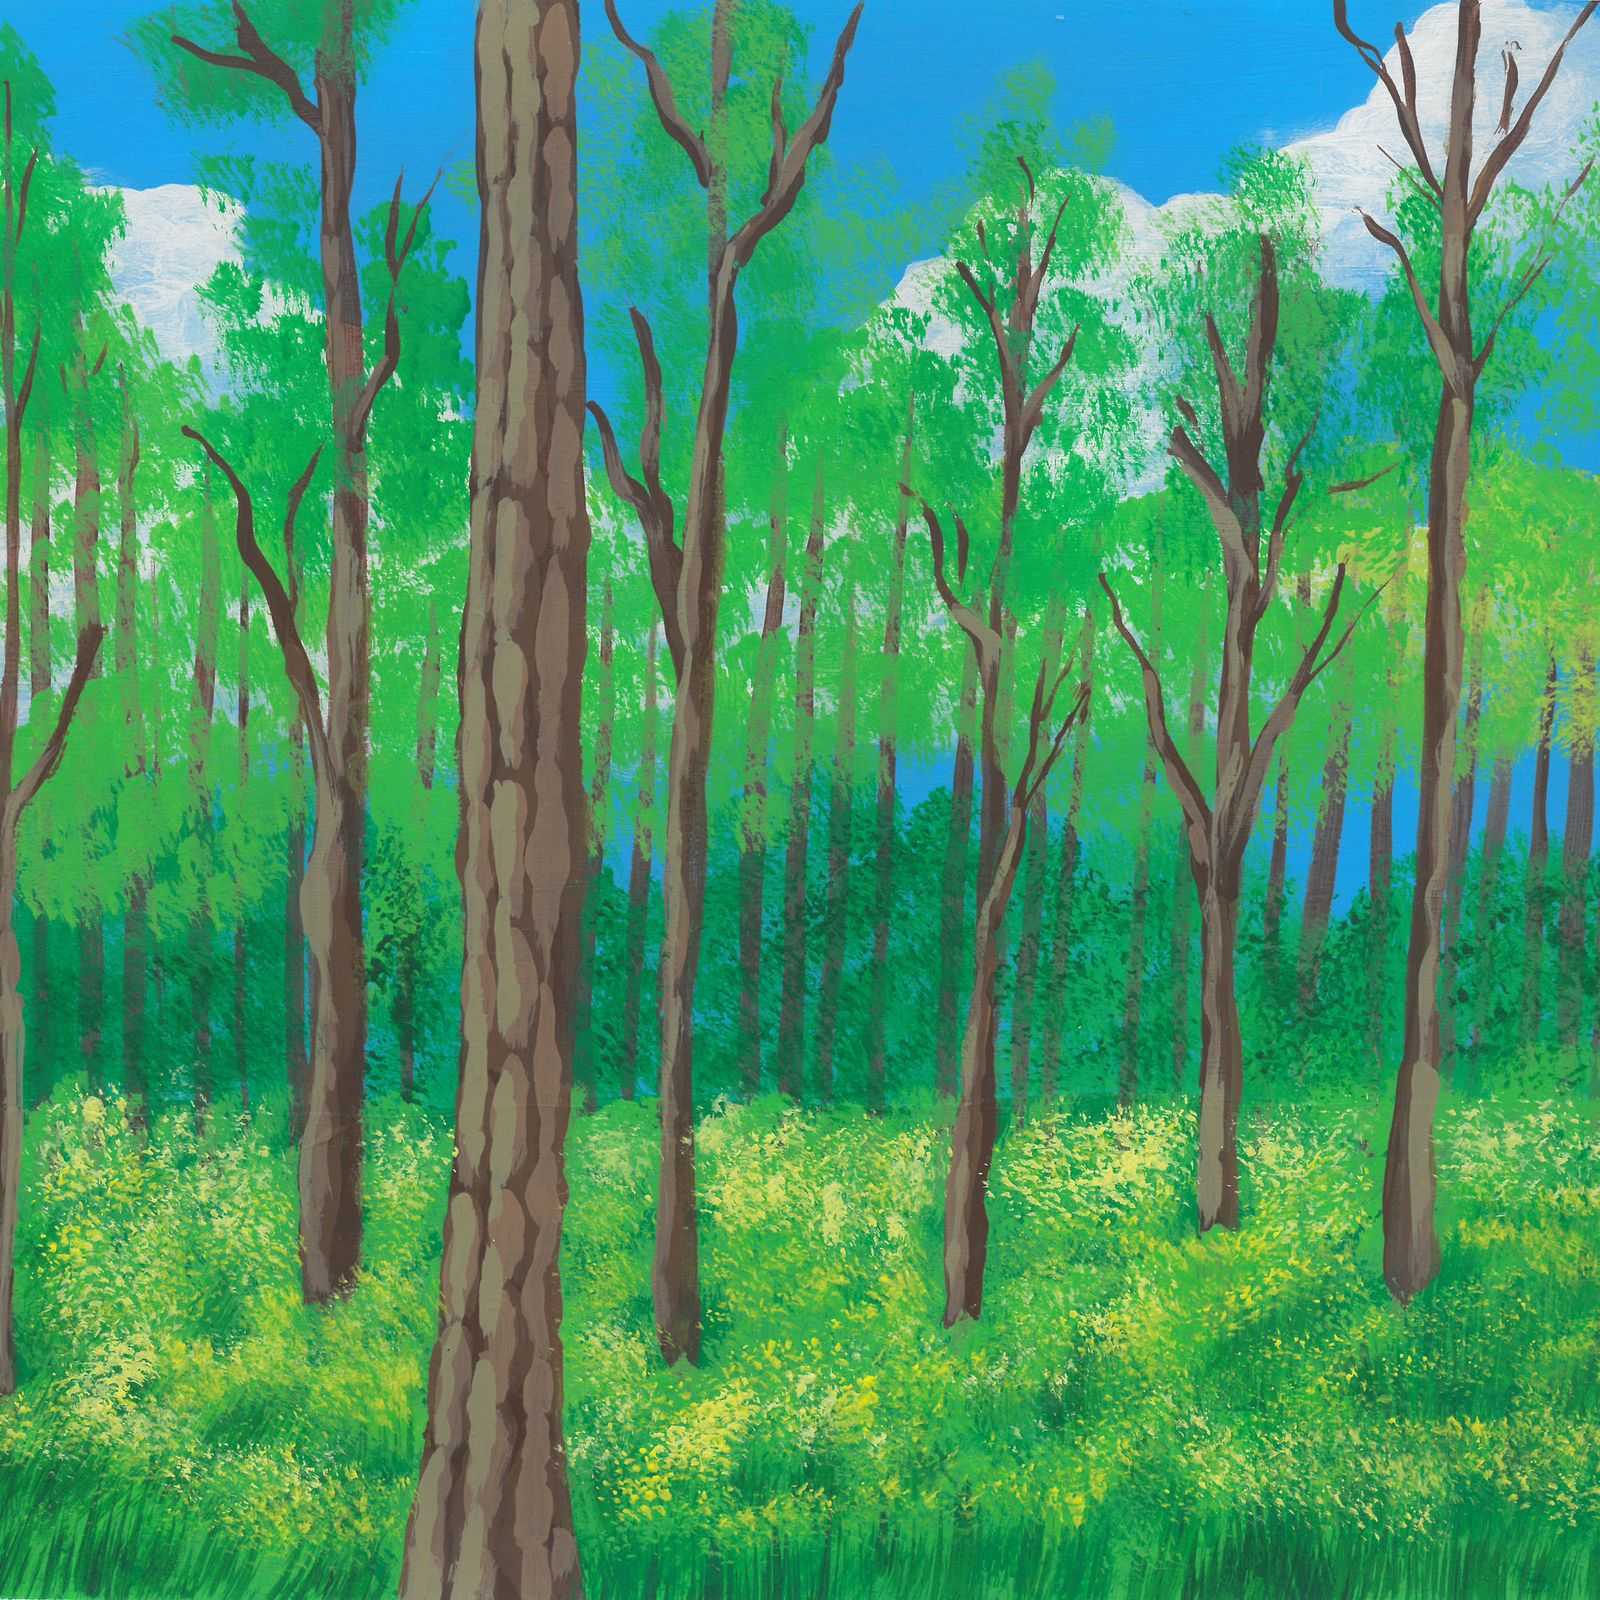 Jungle Book Forest - nature landscape painting - earth.fm